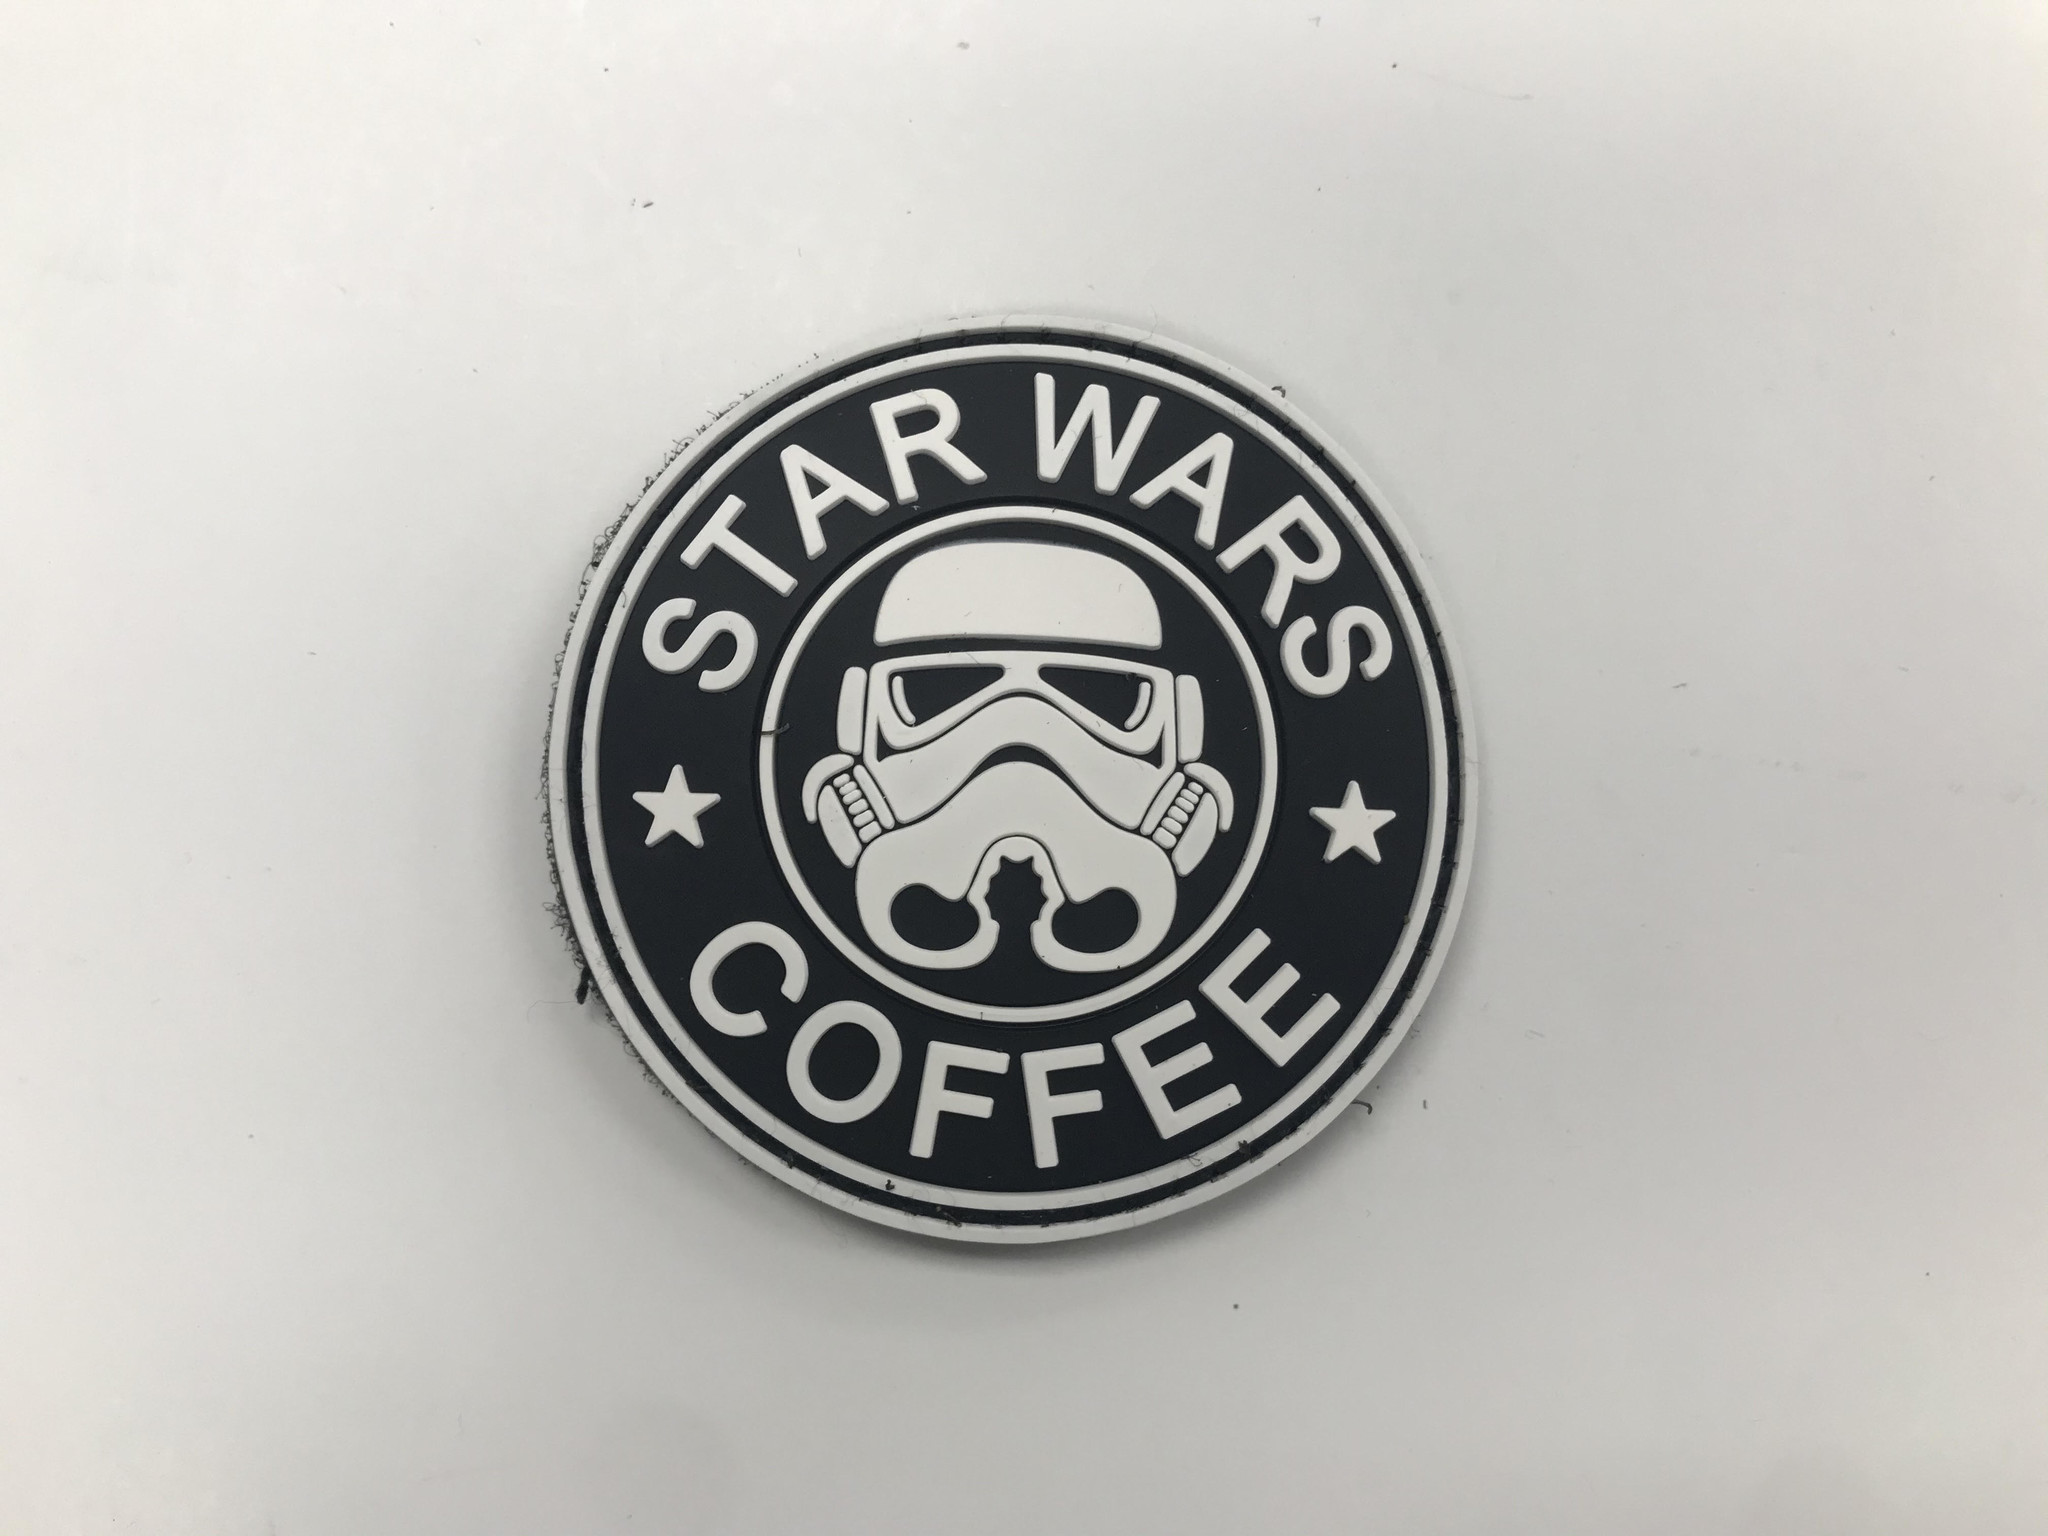 Tactical Innovations Canada PVC Patch - Star Wars Coffee